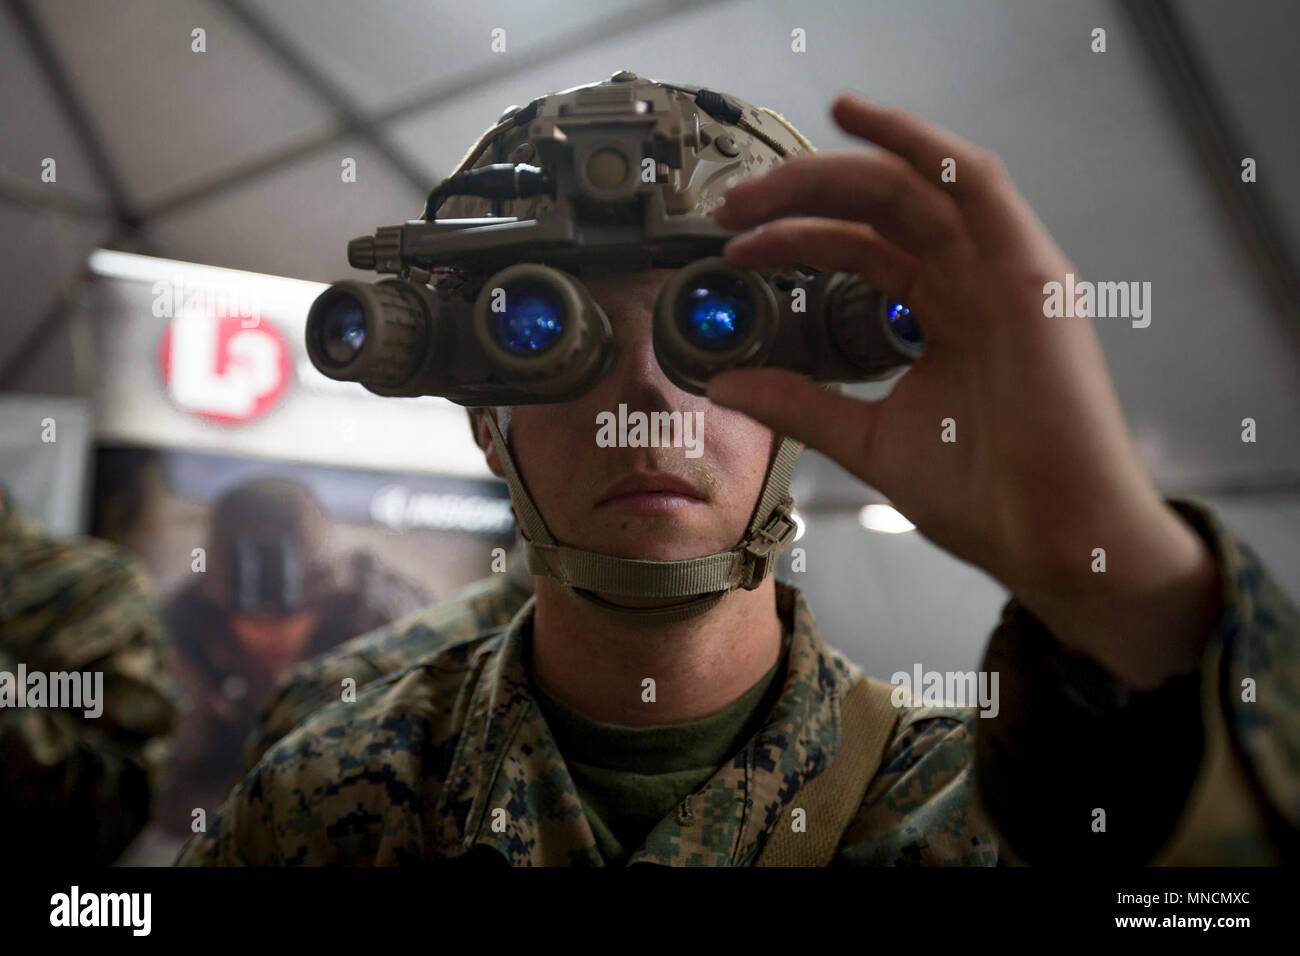 U.S. Marine Corps Lance Cpl. Skyler Stevens, an infantryman with 3rd Battalion, 4th Marine Regiment, 1st Marine Division, uses new night optics technology during Urban Advanced Naval Technology Exercise 2018 (ANTX-18) at Marine Corps Base Camp Pendleton, California, March 19, 2018. The Marines are testing next generation technologies to provide the opportunity to assess the operational utility of emerging technologies and engineering innovations that improve the Marine's survivability, lethality and connectivity in complex urban environments. (U.S. Marine Corps Stock Photo